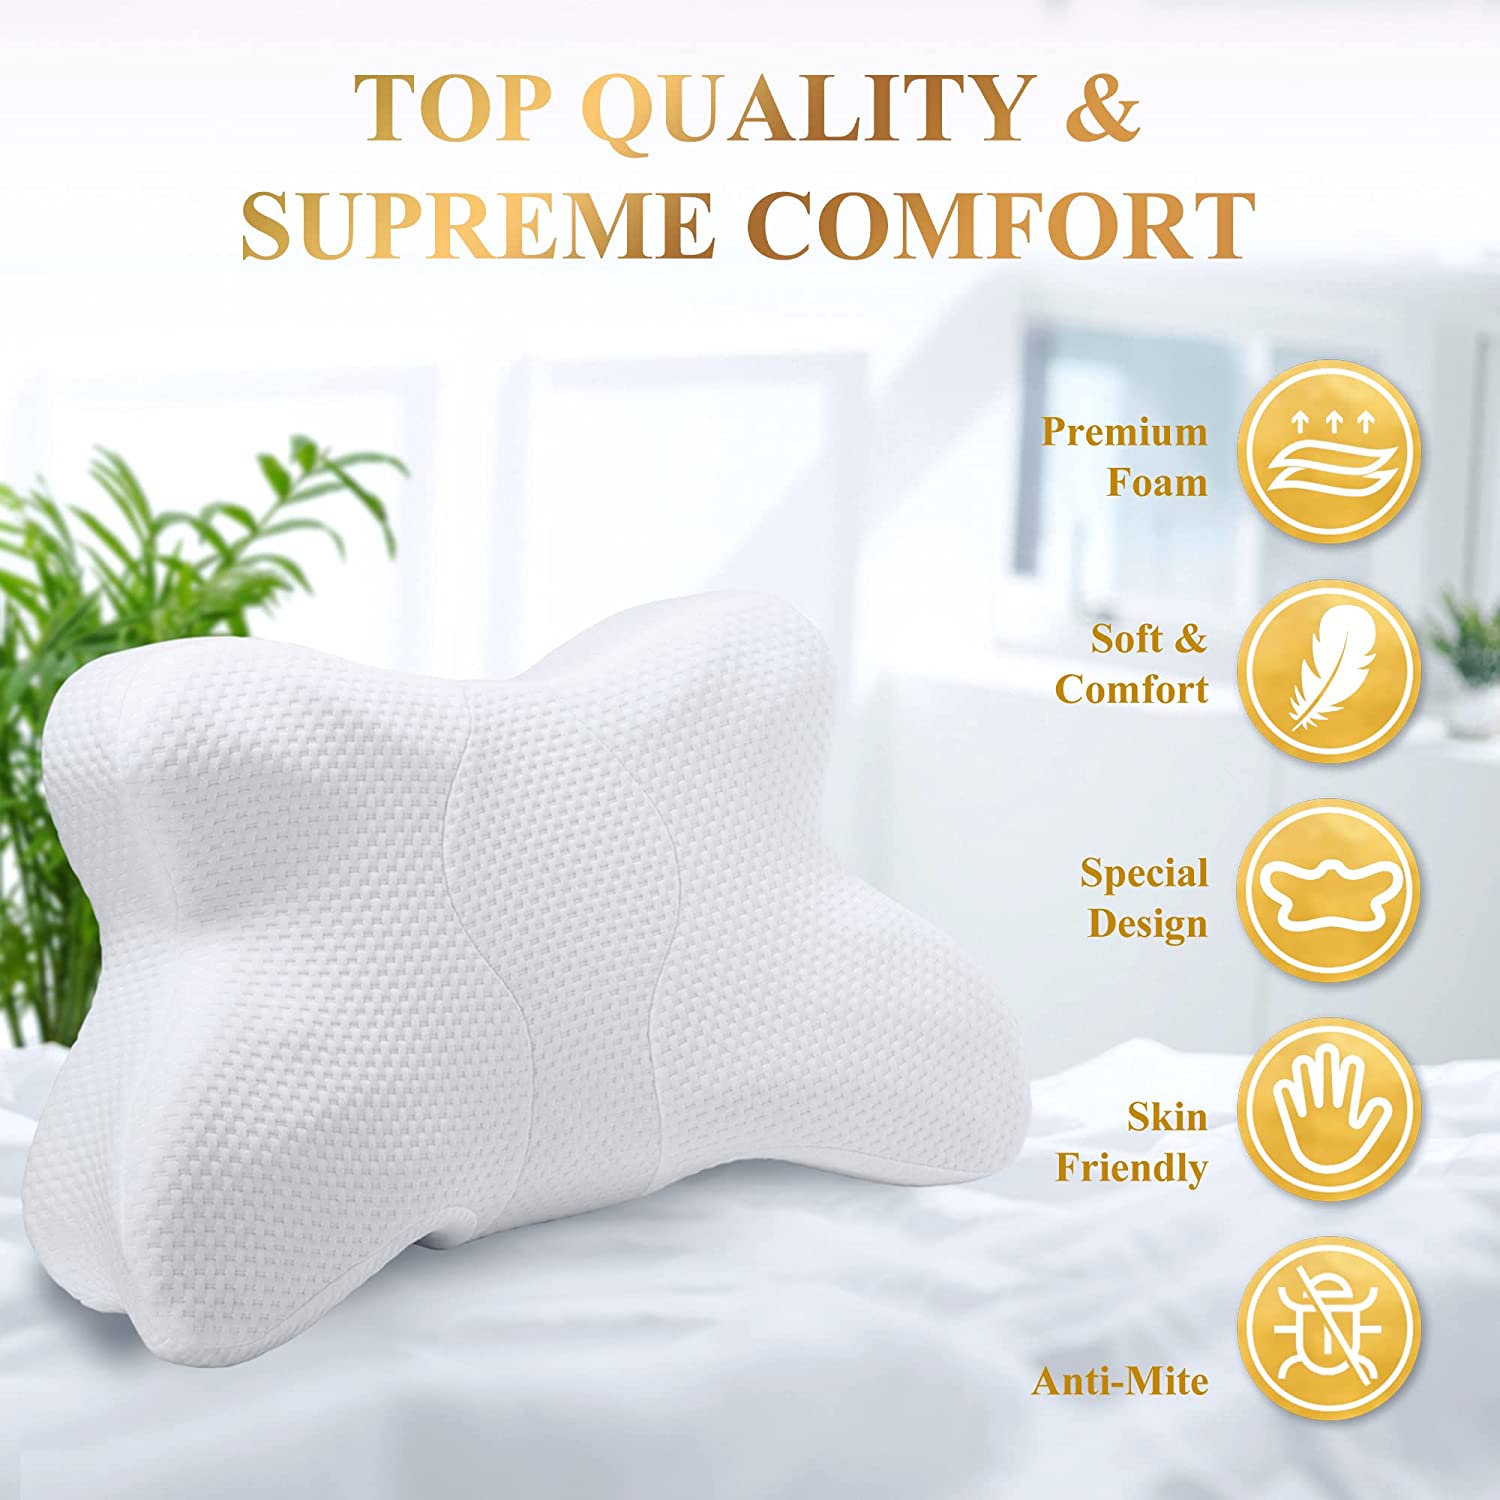 DIKI Cervical Memory Foam Pillow - Adjustable Contour Pillow for Neck Pain Relief, Orthopedic Neck Support Sleeping Pillow for Side Back Stomach Sleeper, Ergonomic Bed Pillow for Neck Pain,White